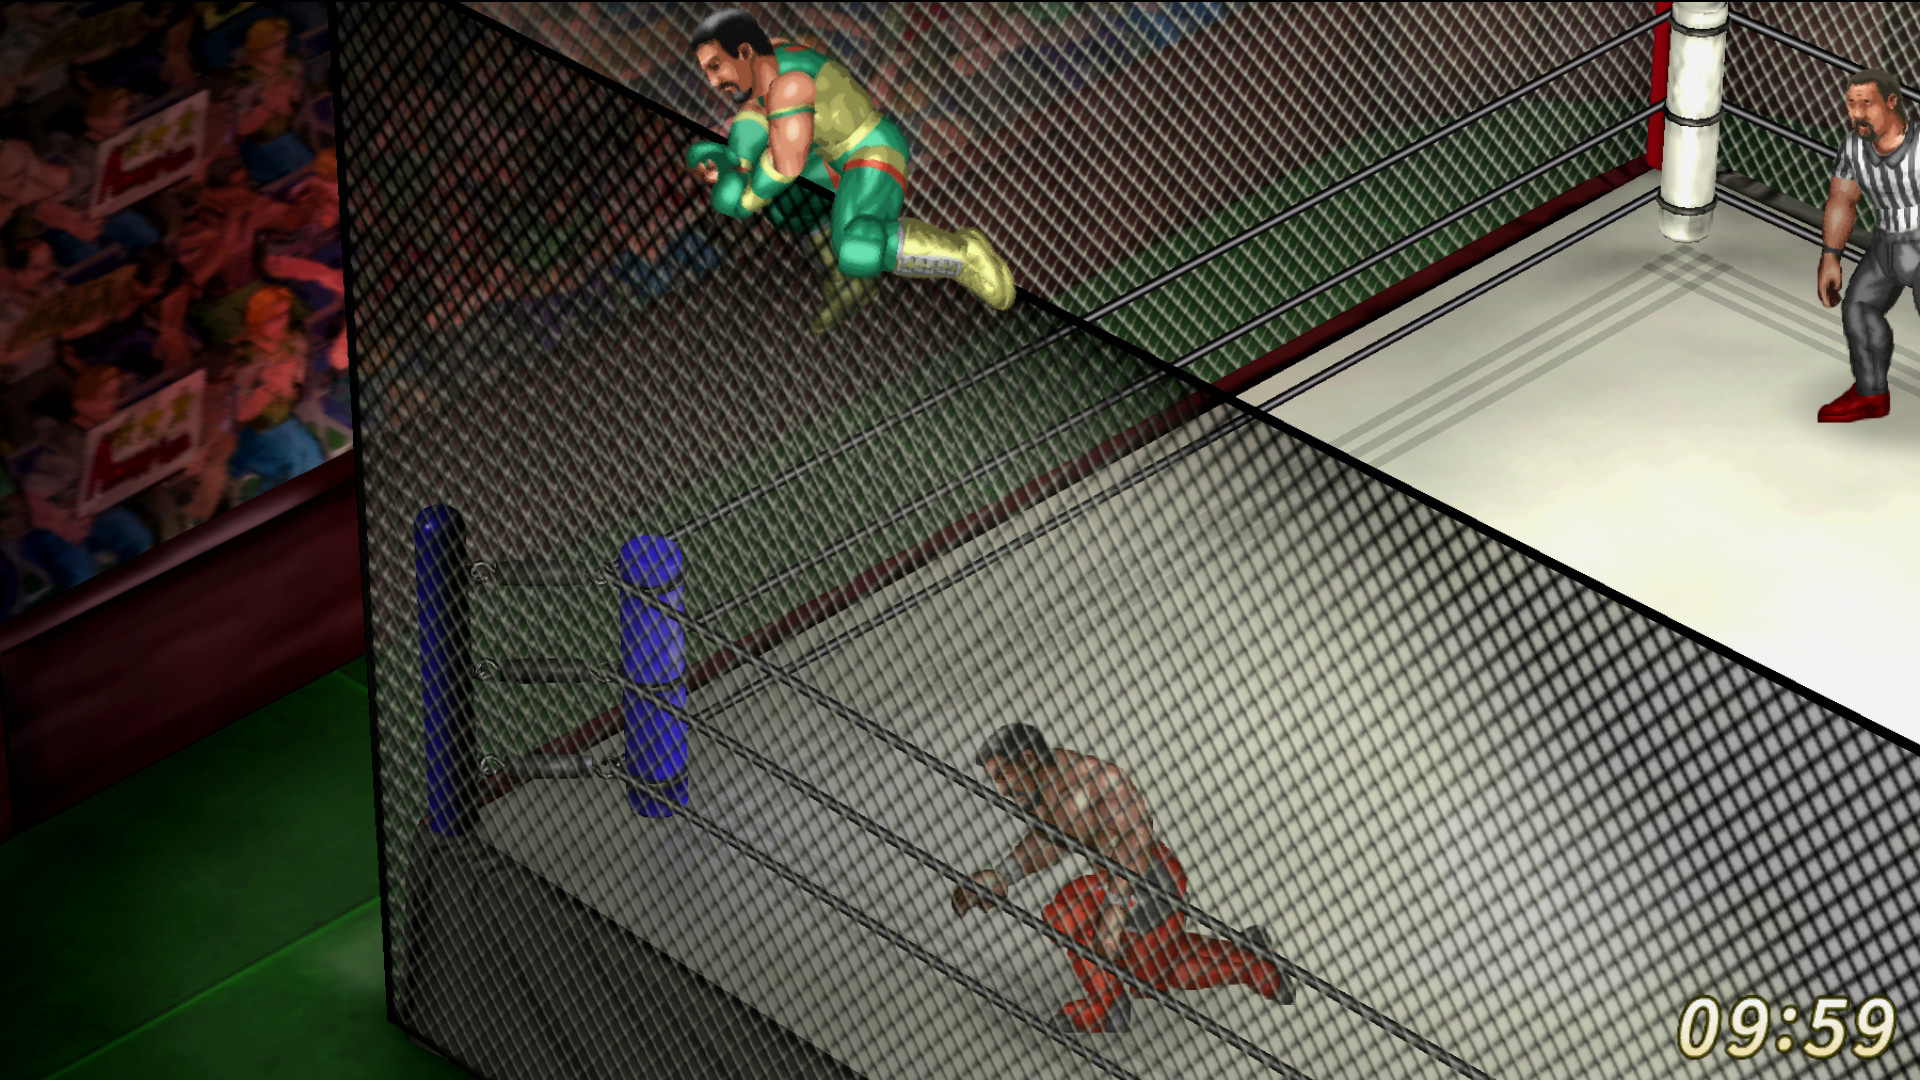 best fire pro wrestling world caws ps4